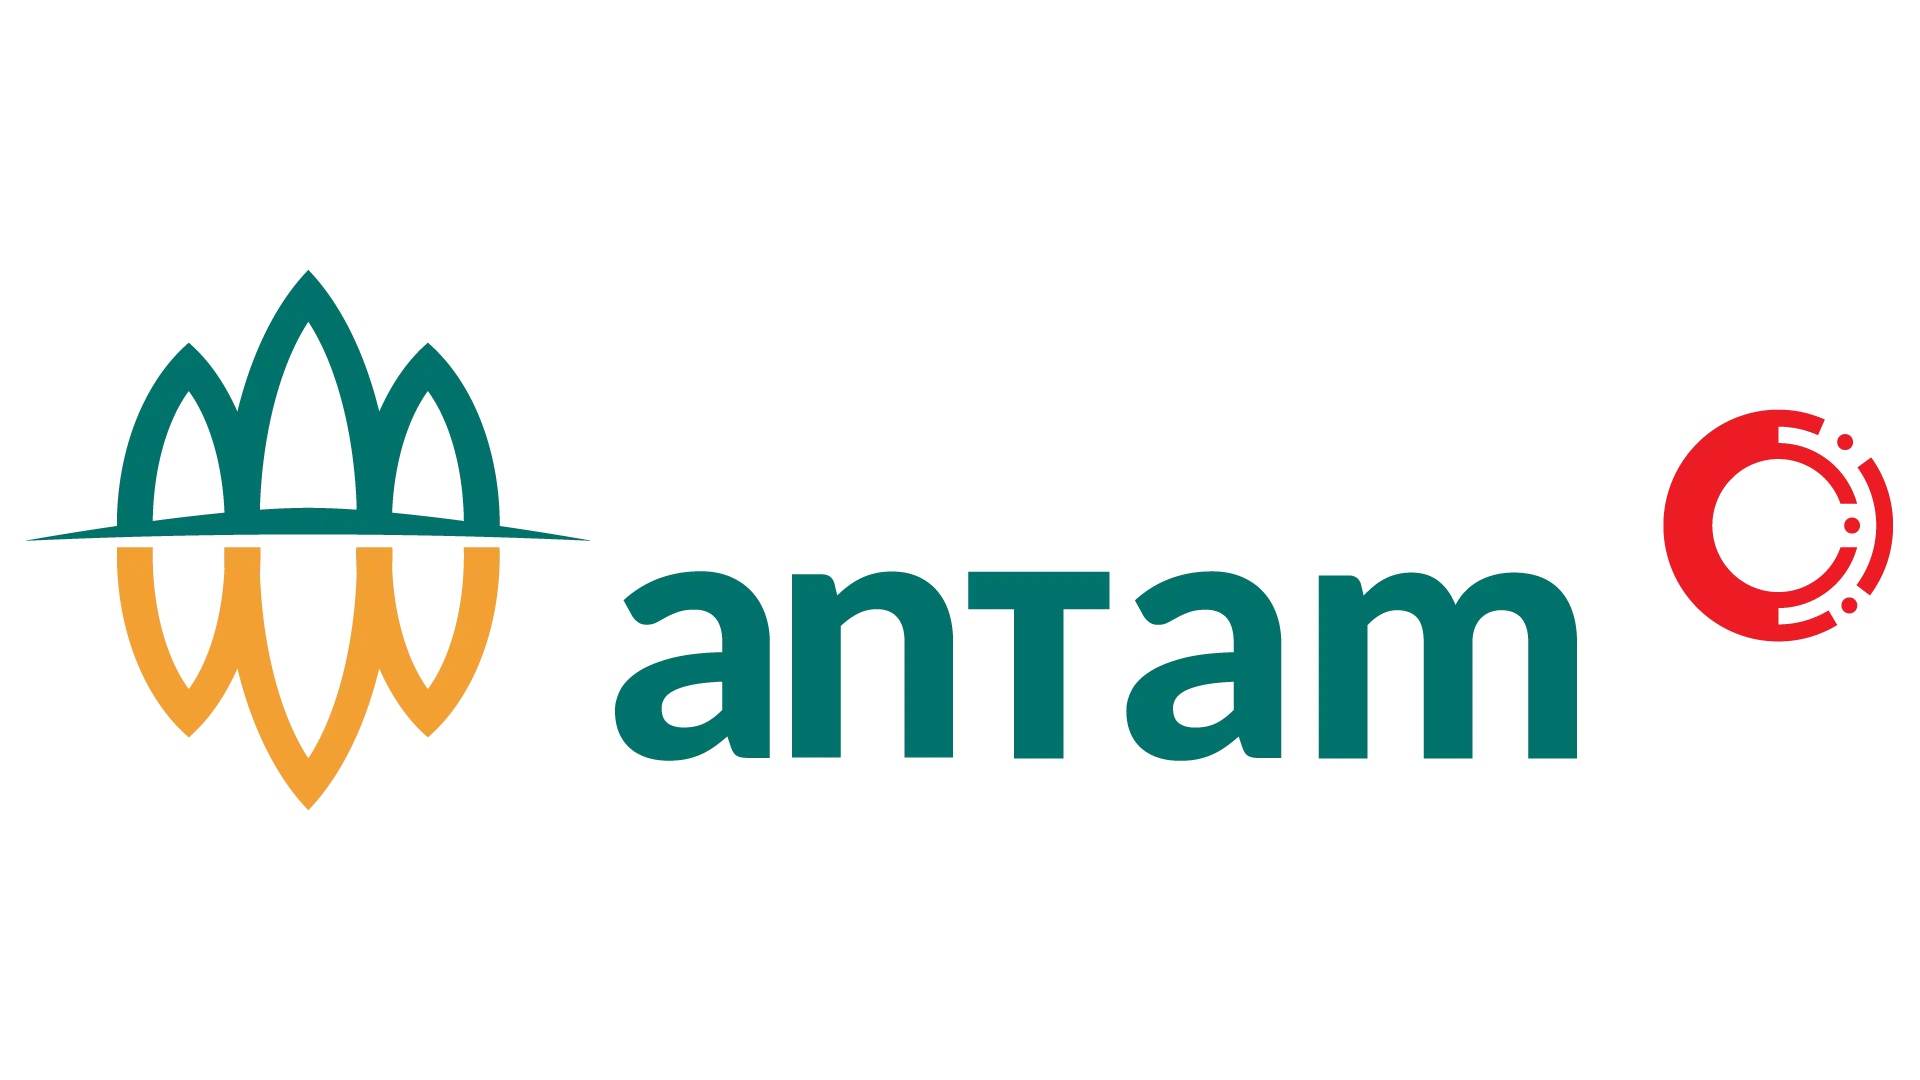 WhatsApp for mining industry owned by Antam company